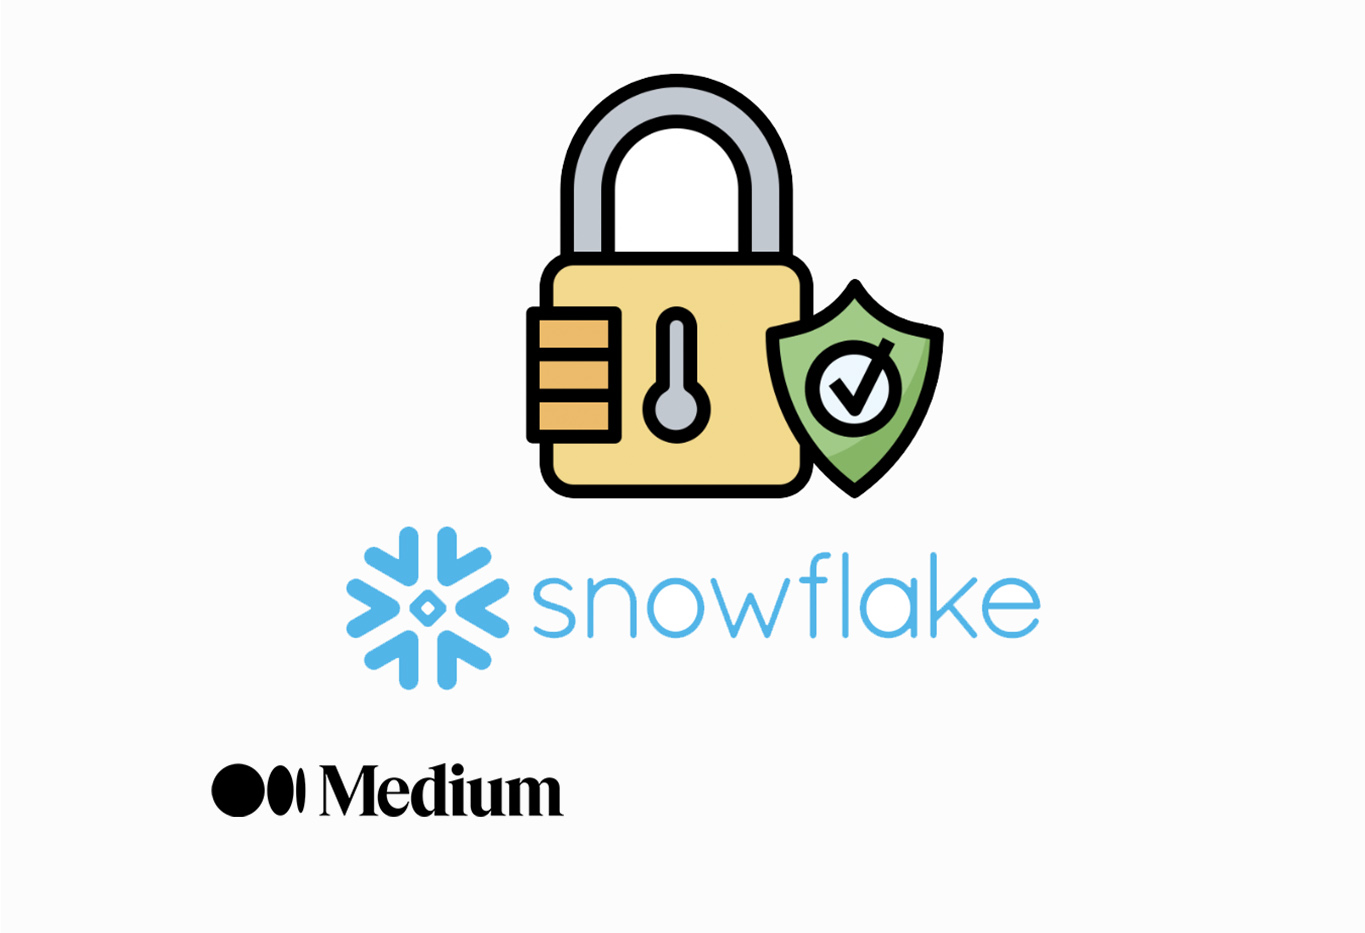 Snowflake access control at scale